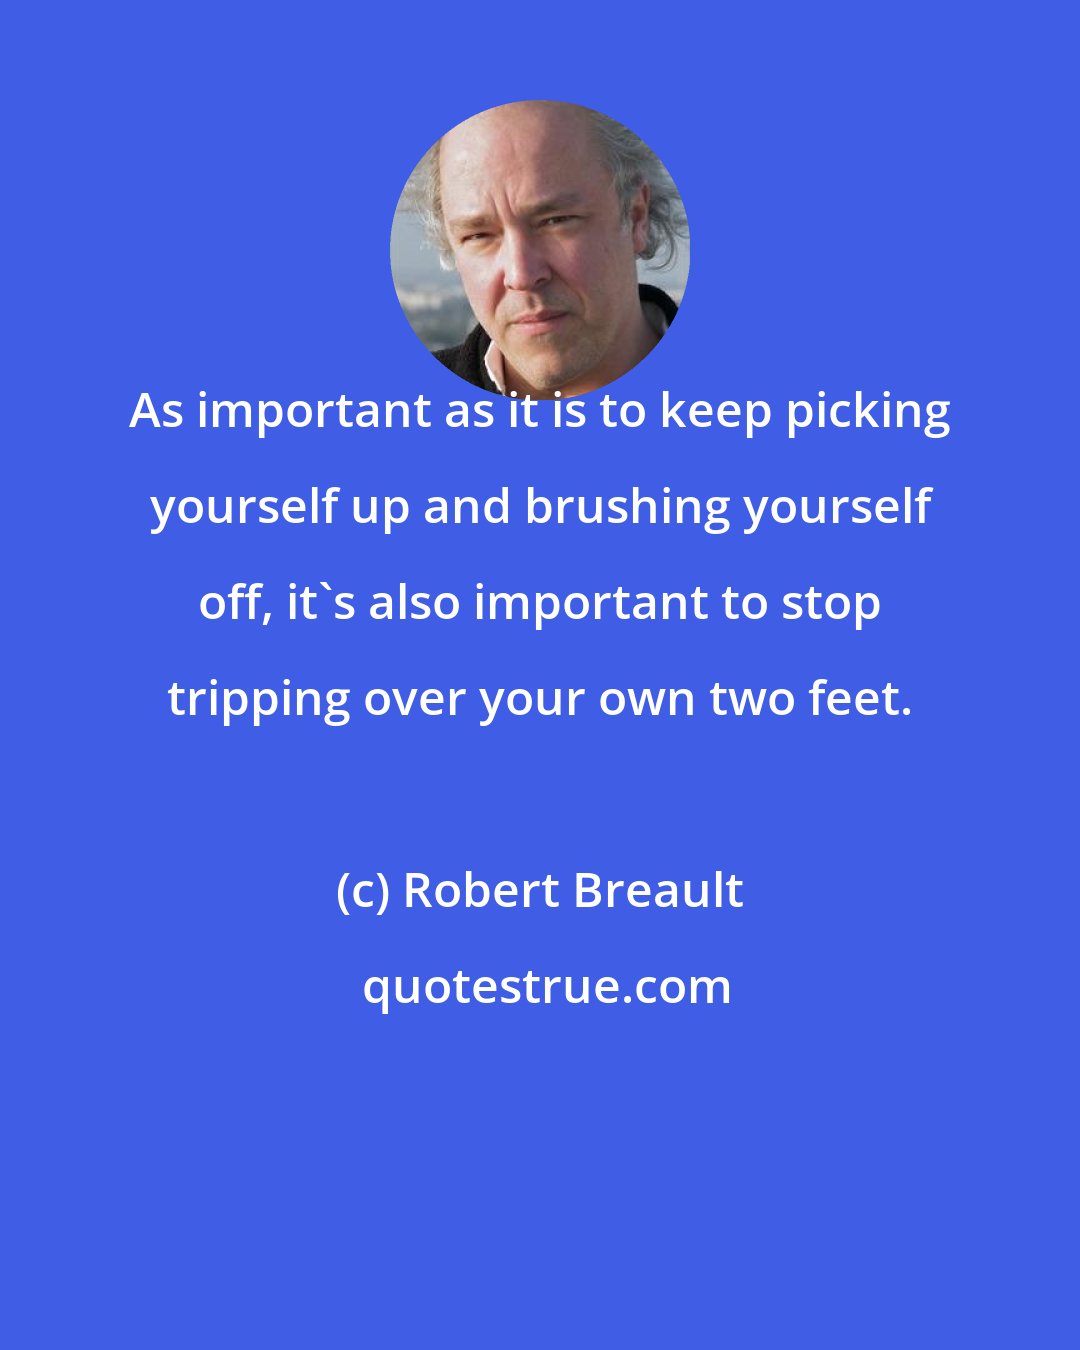 Robert Breault: As important as it is to keep picking yourself up and brushing yourself off, it's also important to stop tripping over your own two feet.